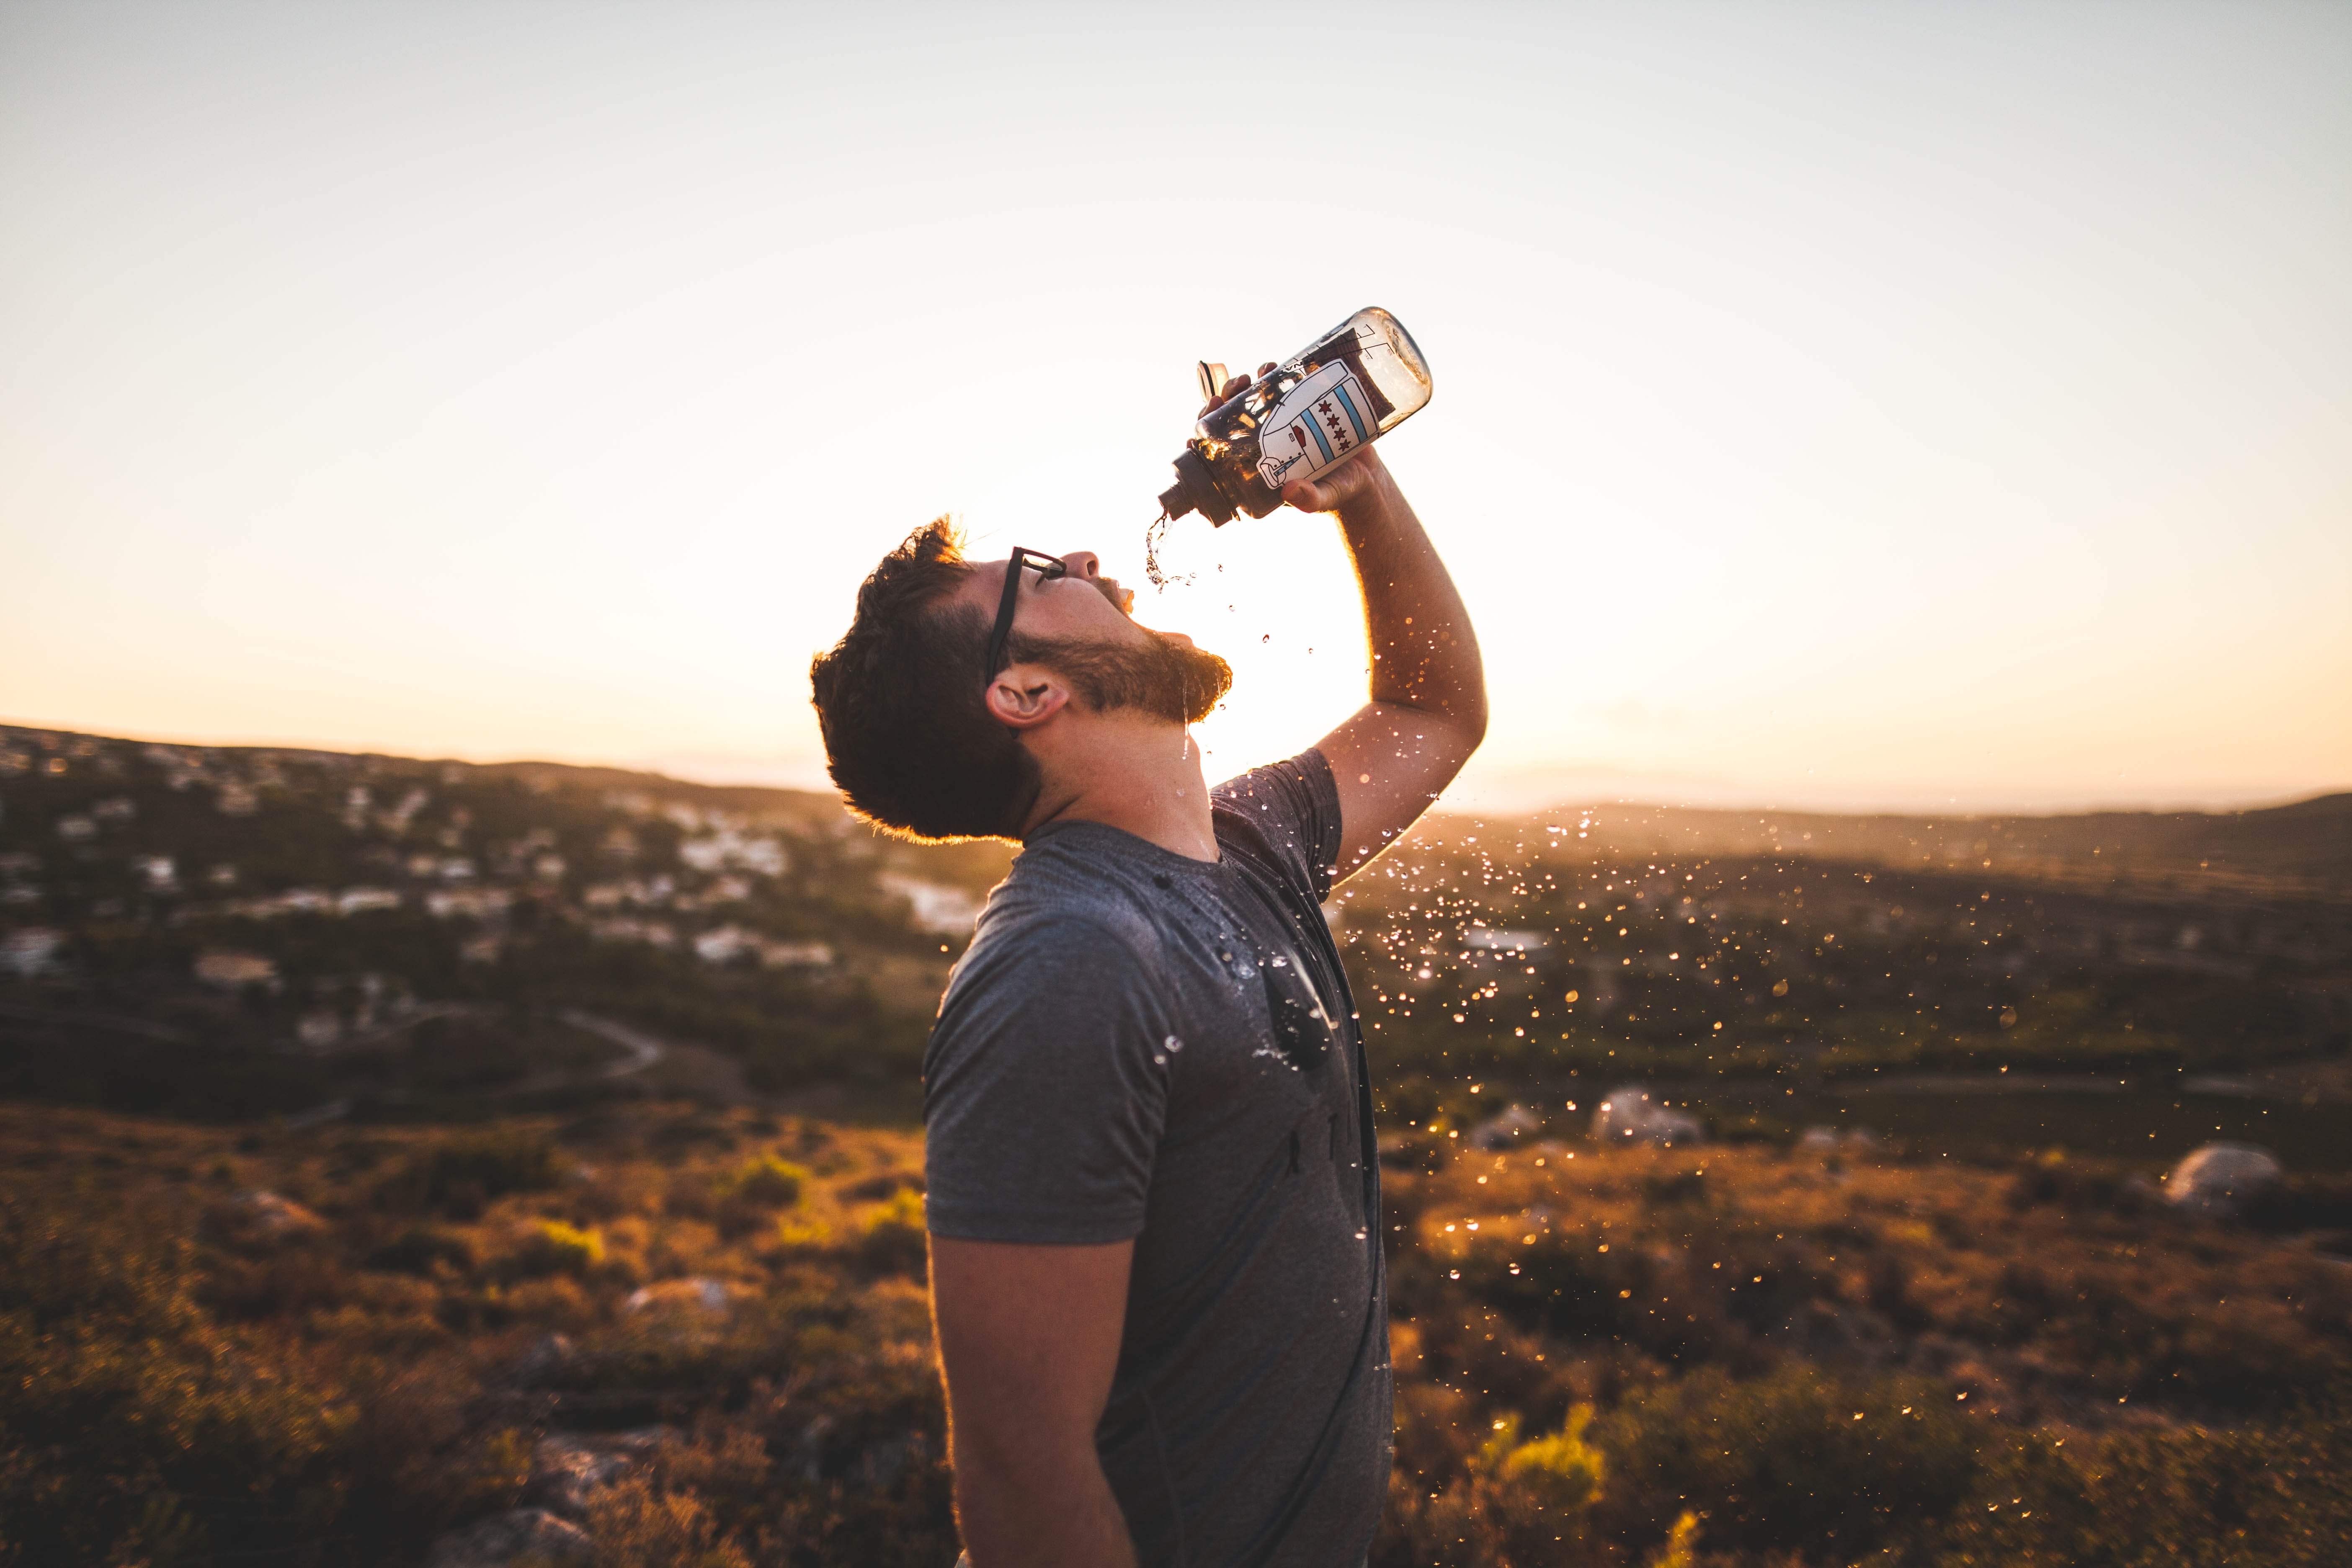 an image of a man drinking from a water bottle